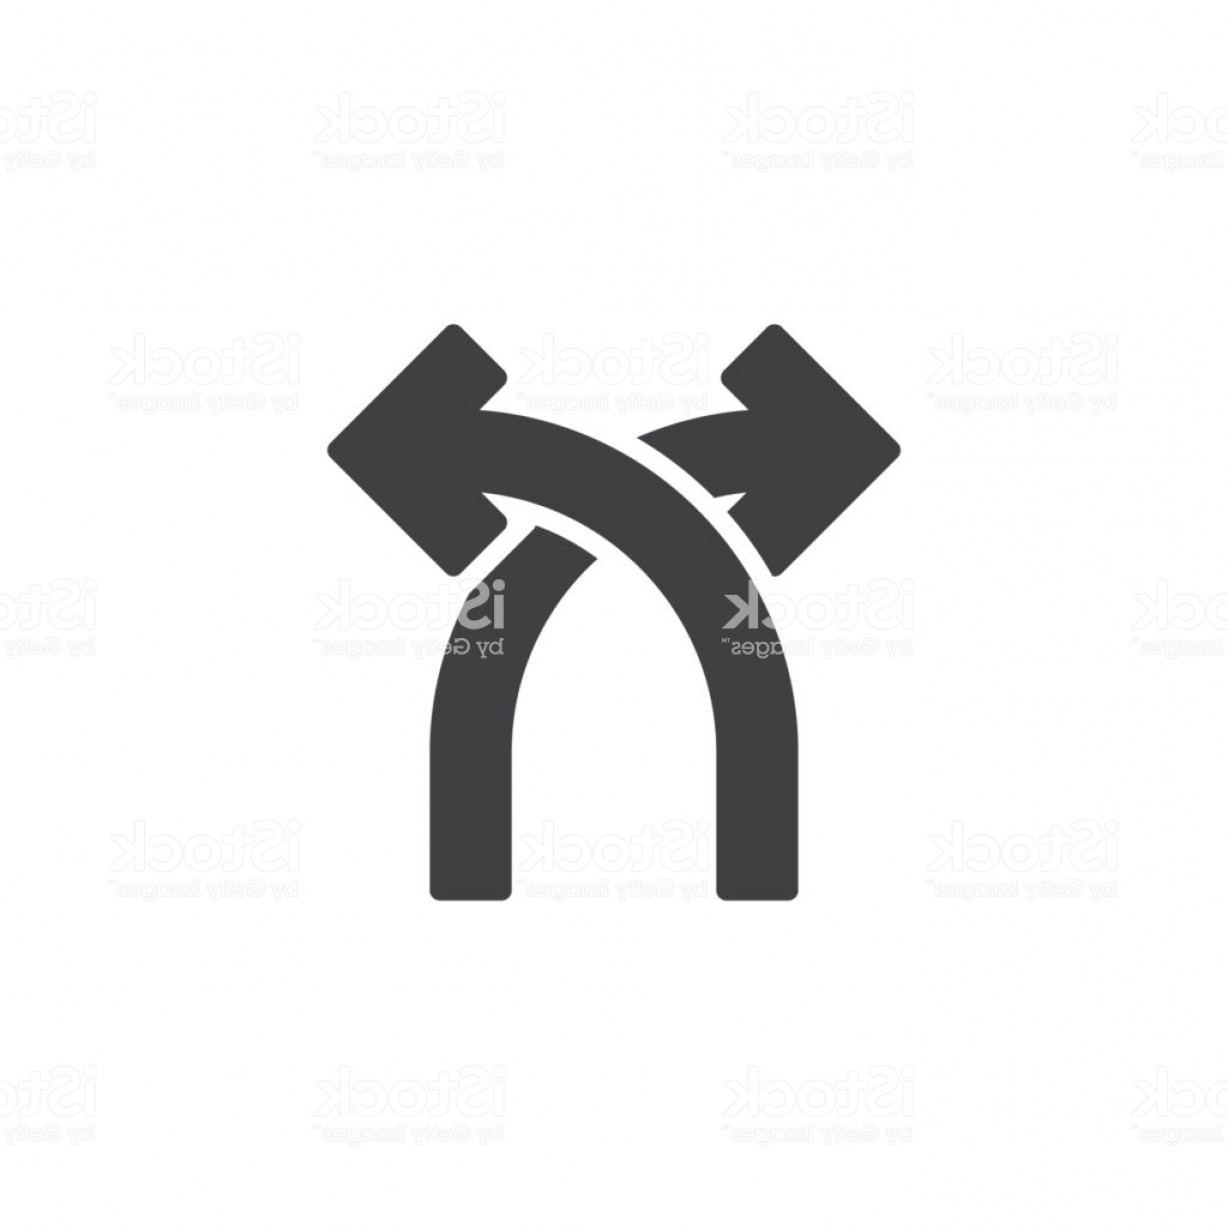 Download Crossed Arrows Vector at Vectorified.com | Collection of ...